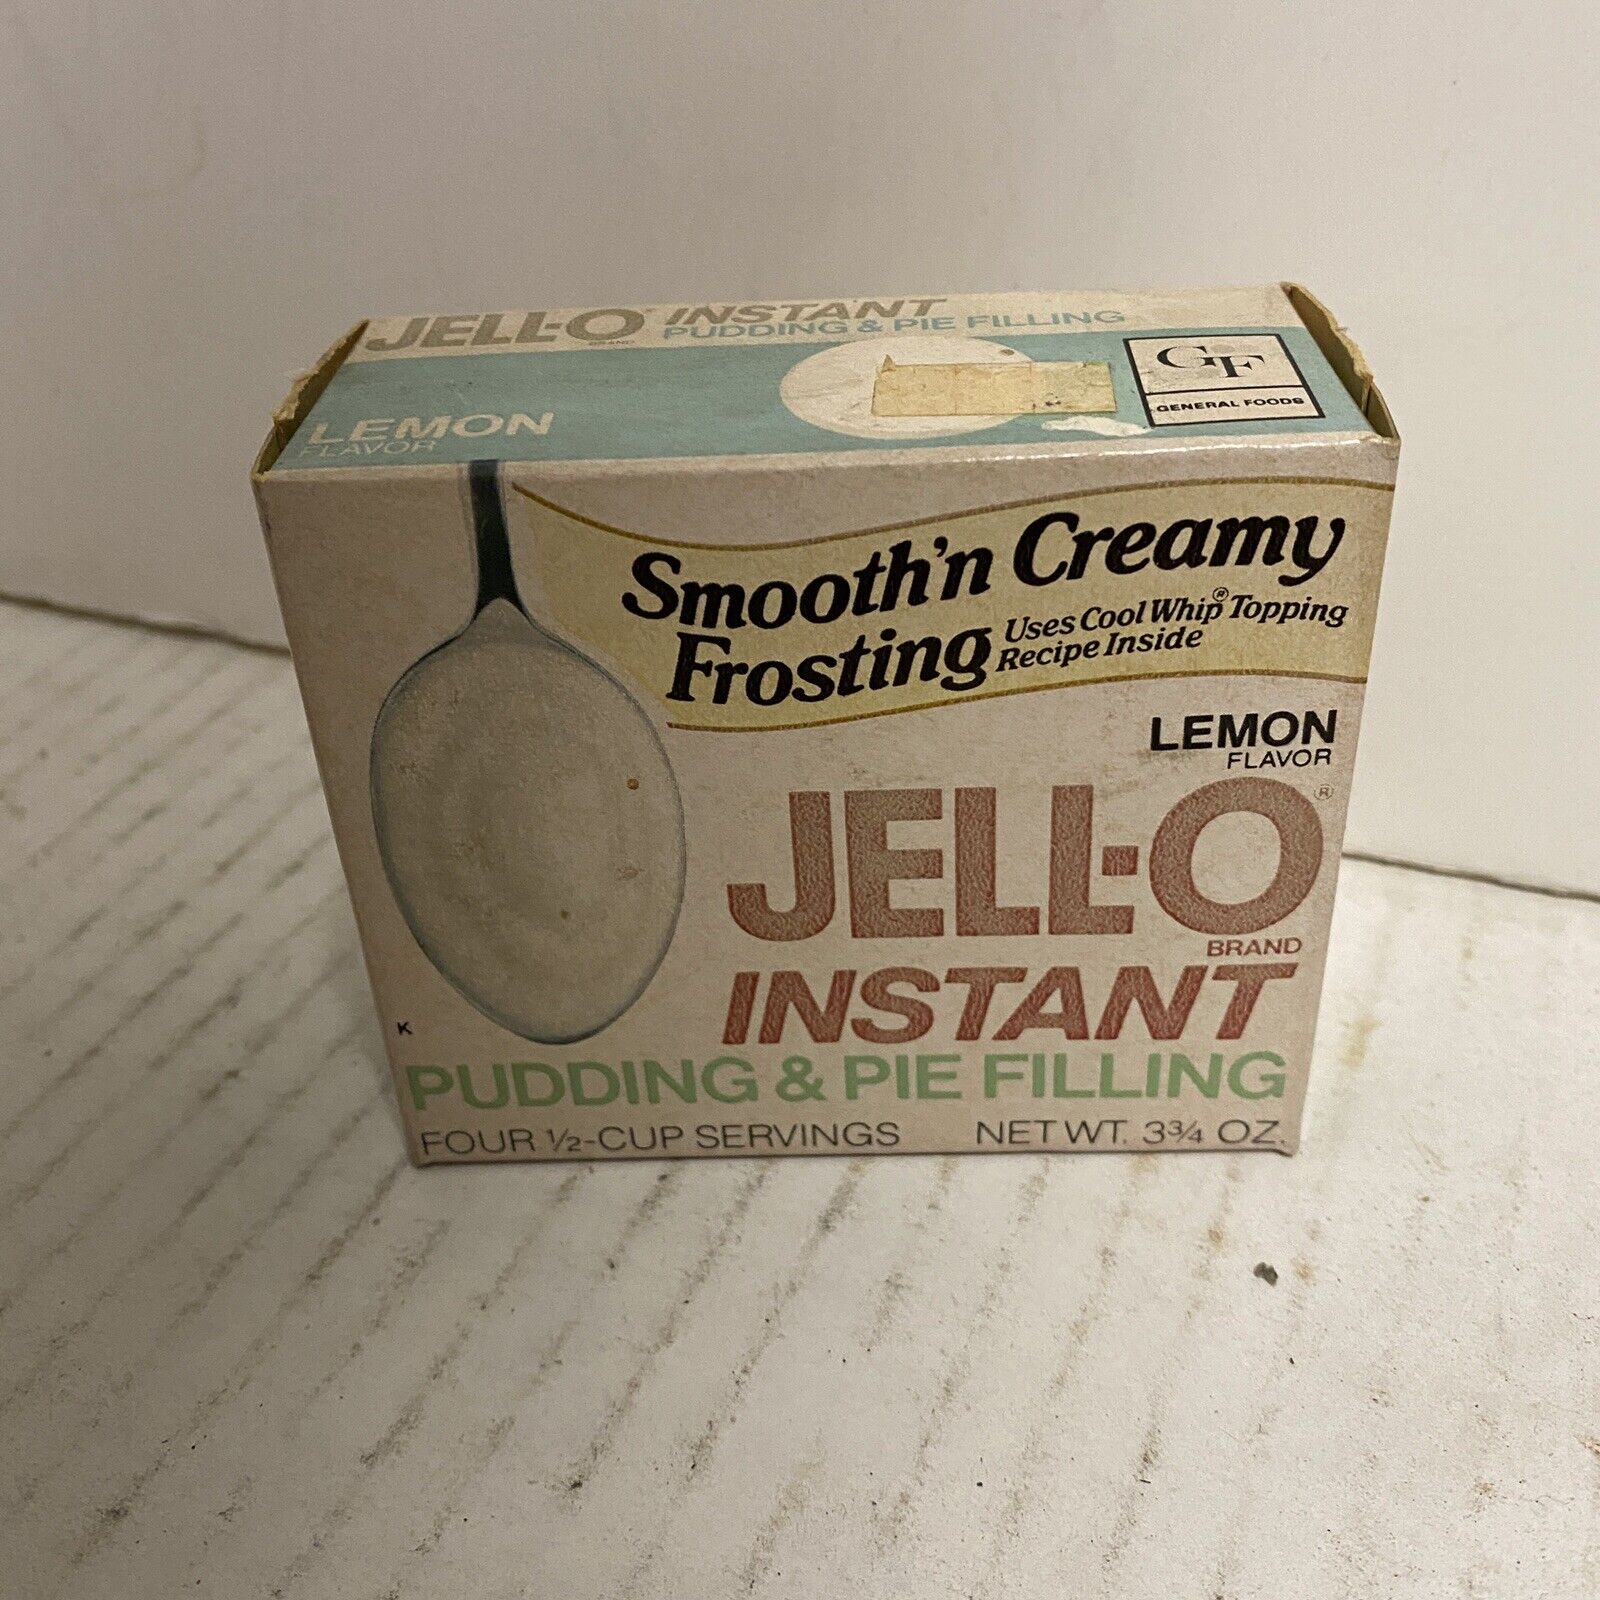 Jello Instant Pudding Pie Filling Smoothin Creamy Frosting Lemon Flavor Vintage 